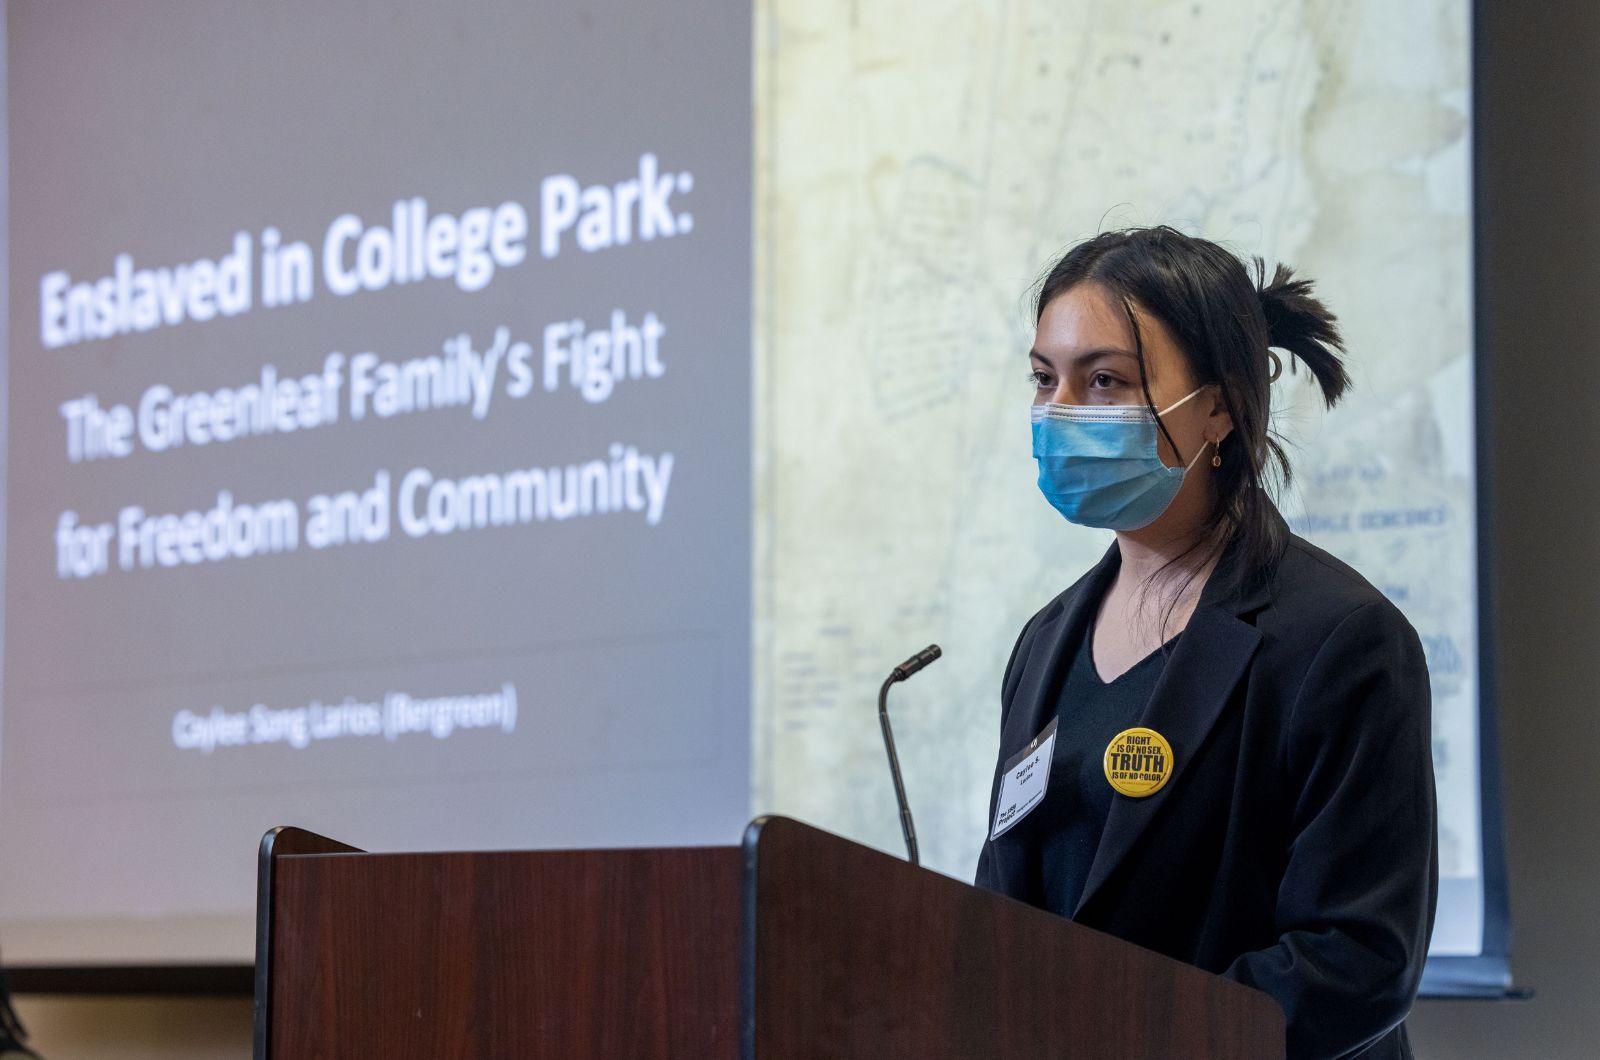 Caylee Song Bergreen standing at a podium in front of her presentation, "Enslaved in College Park: The Greenleaf Family's Fight for Freedom and Community"